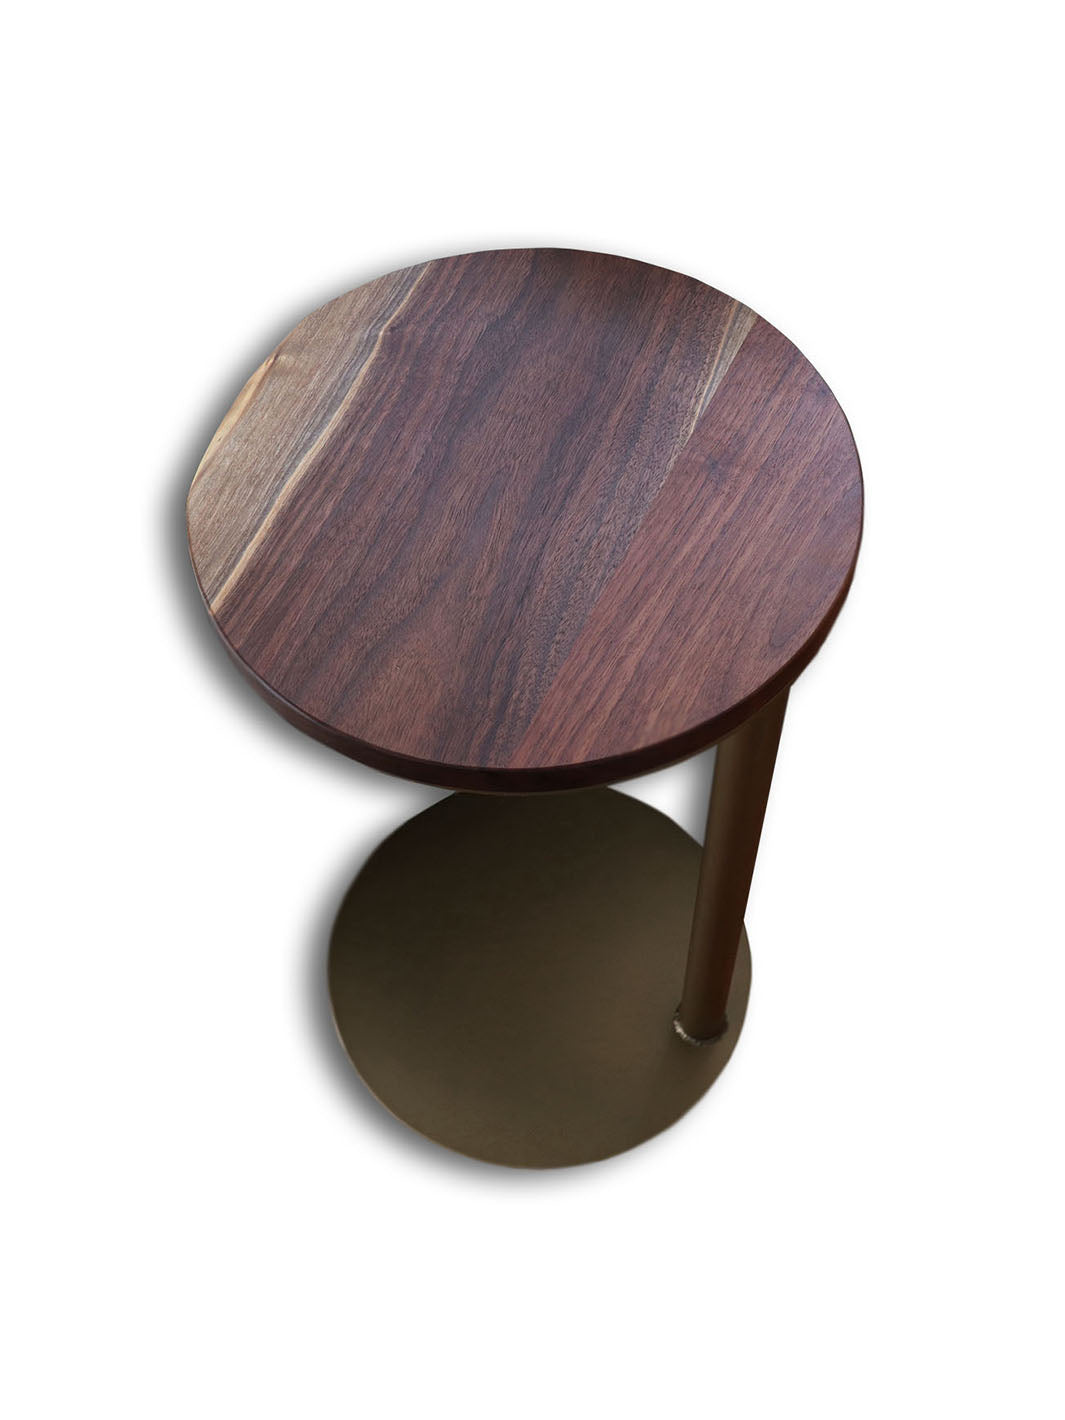 Earthly Comfort Live-Edge Round Walnut Side Table with Gold Base Earthly Comfort Side Tables 